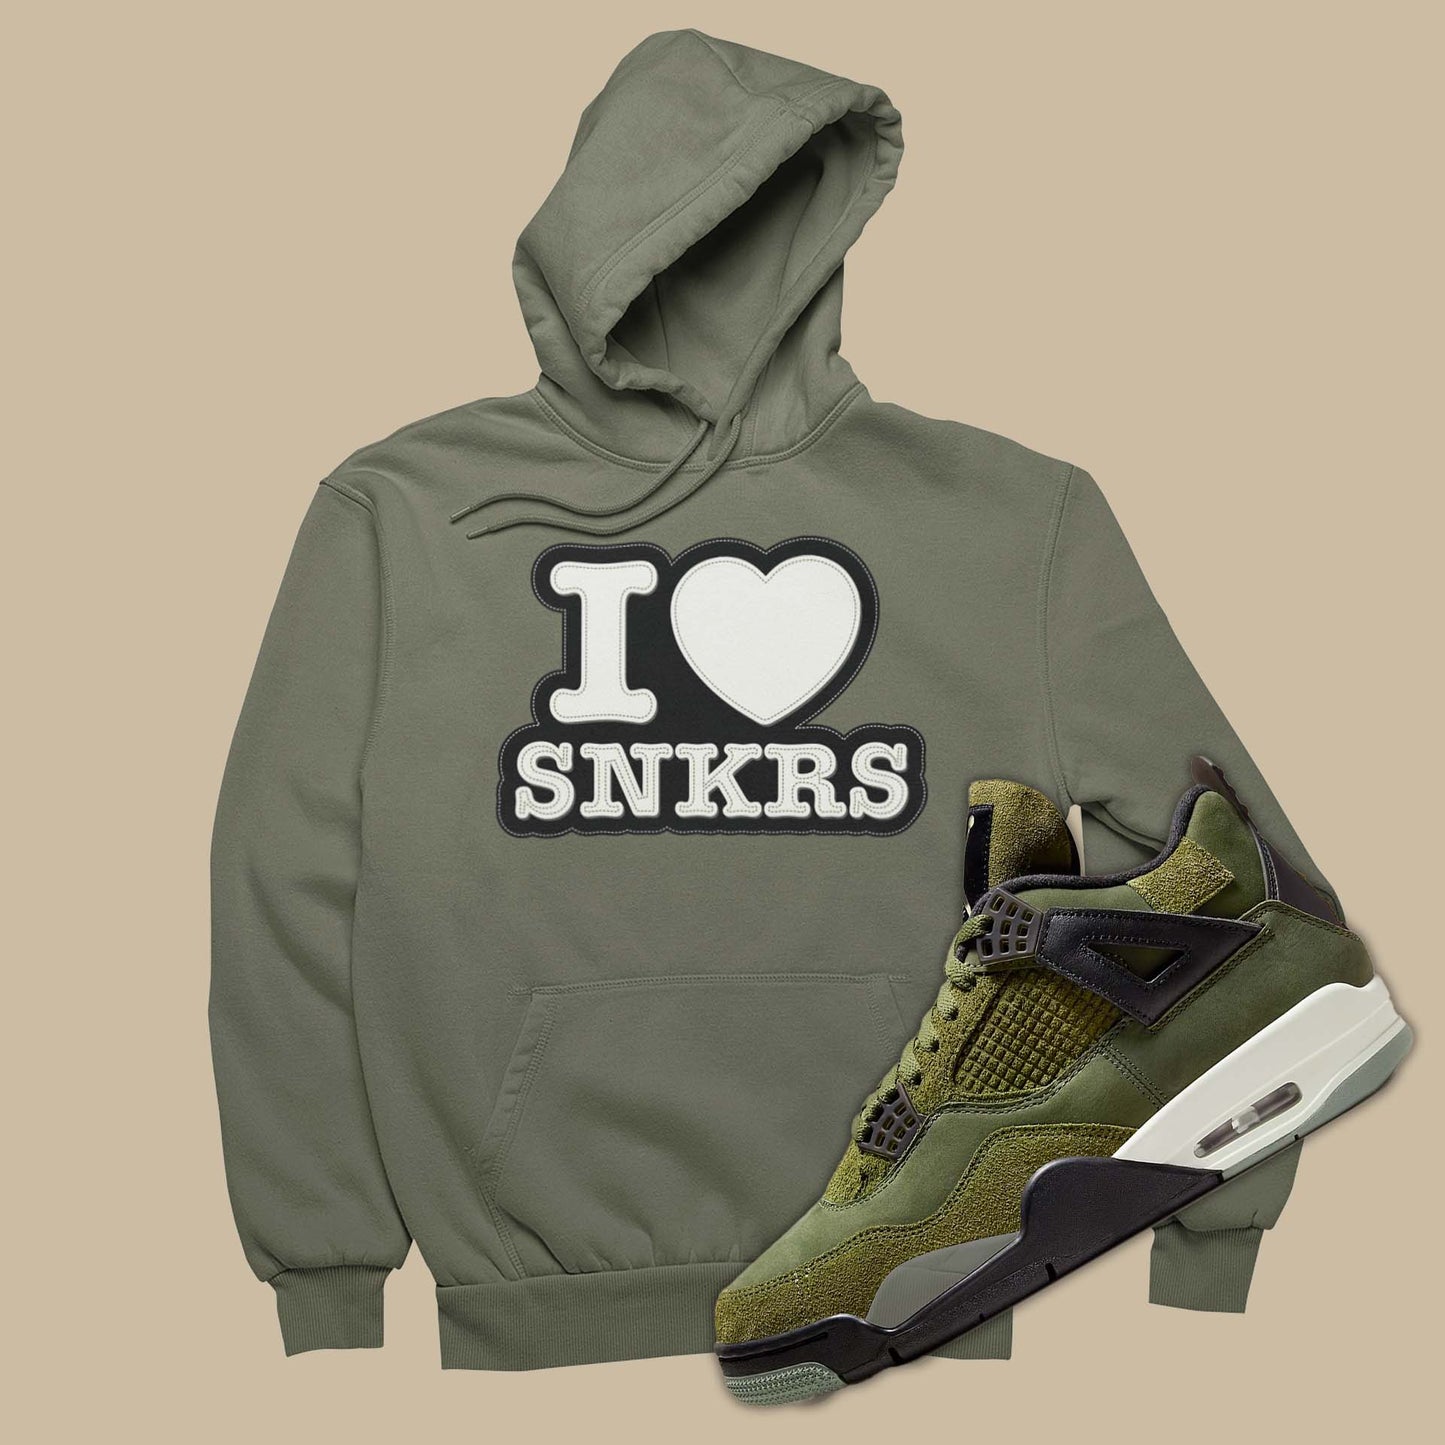 This sneaker match hoodie is the perfect sweatshirt to match your Air Jordan 4 Craft Medium Olive with I Love Sneakers graphic